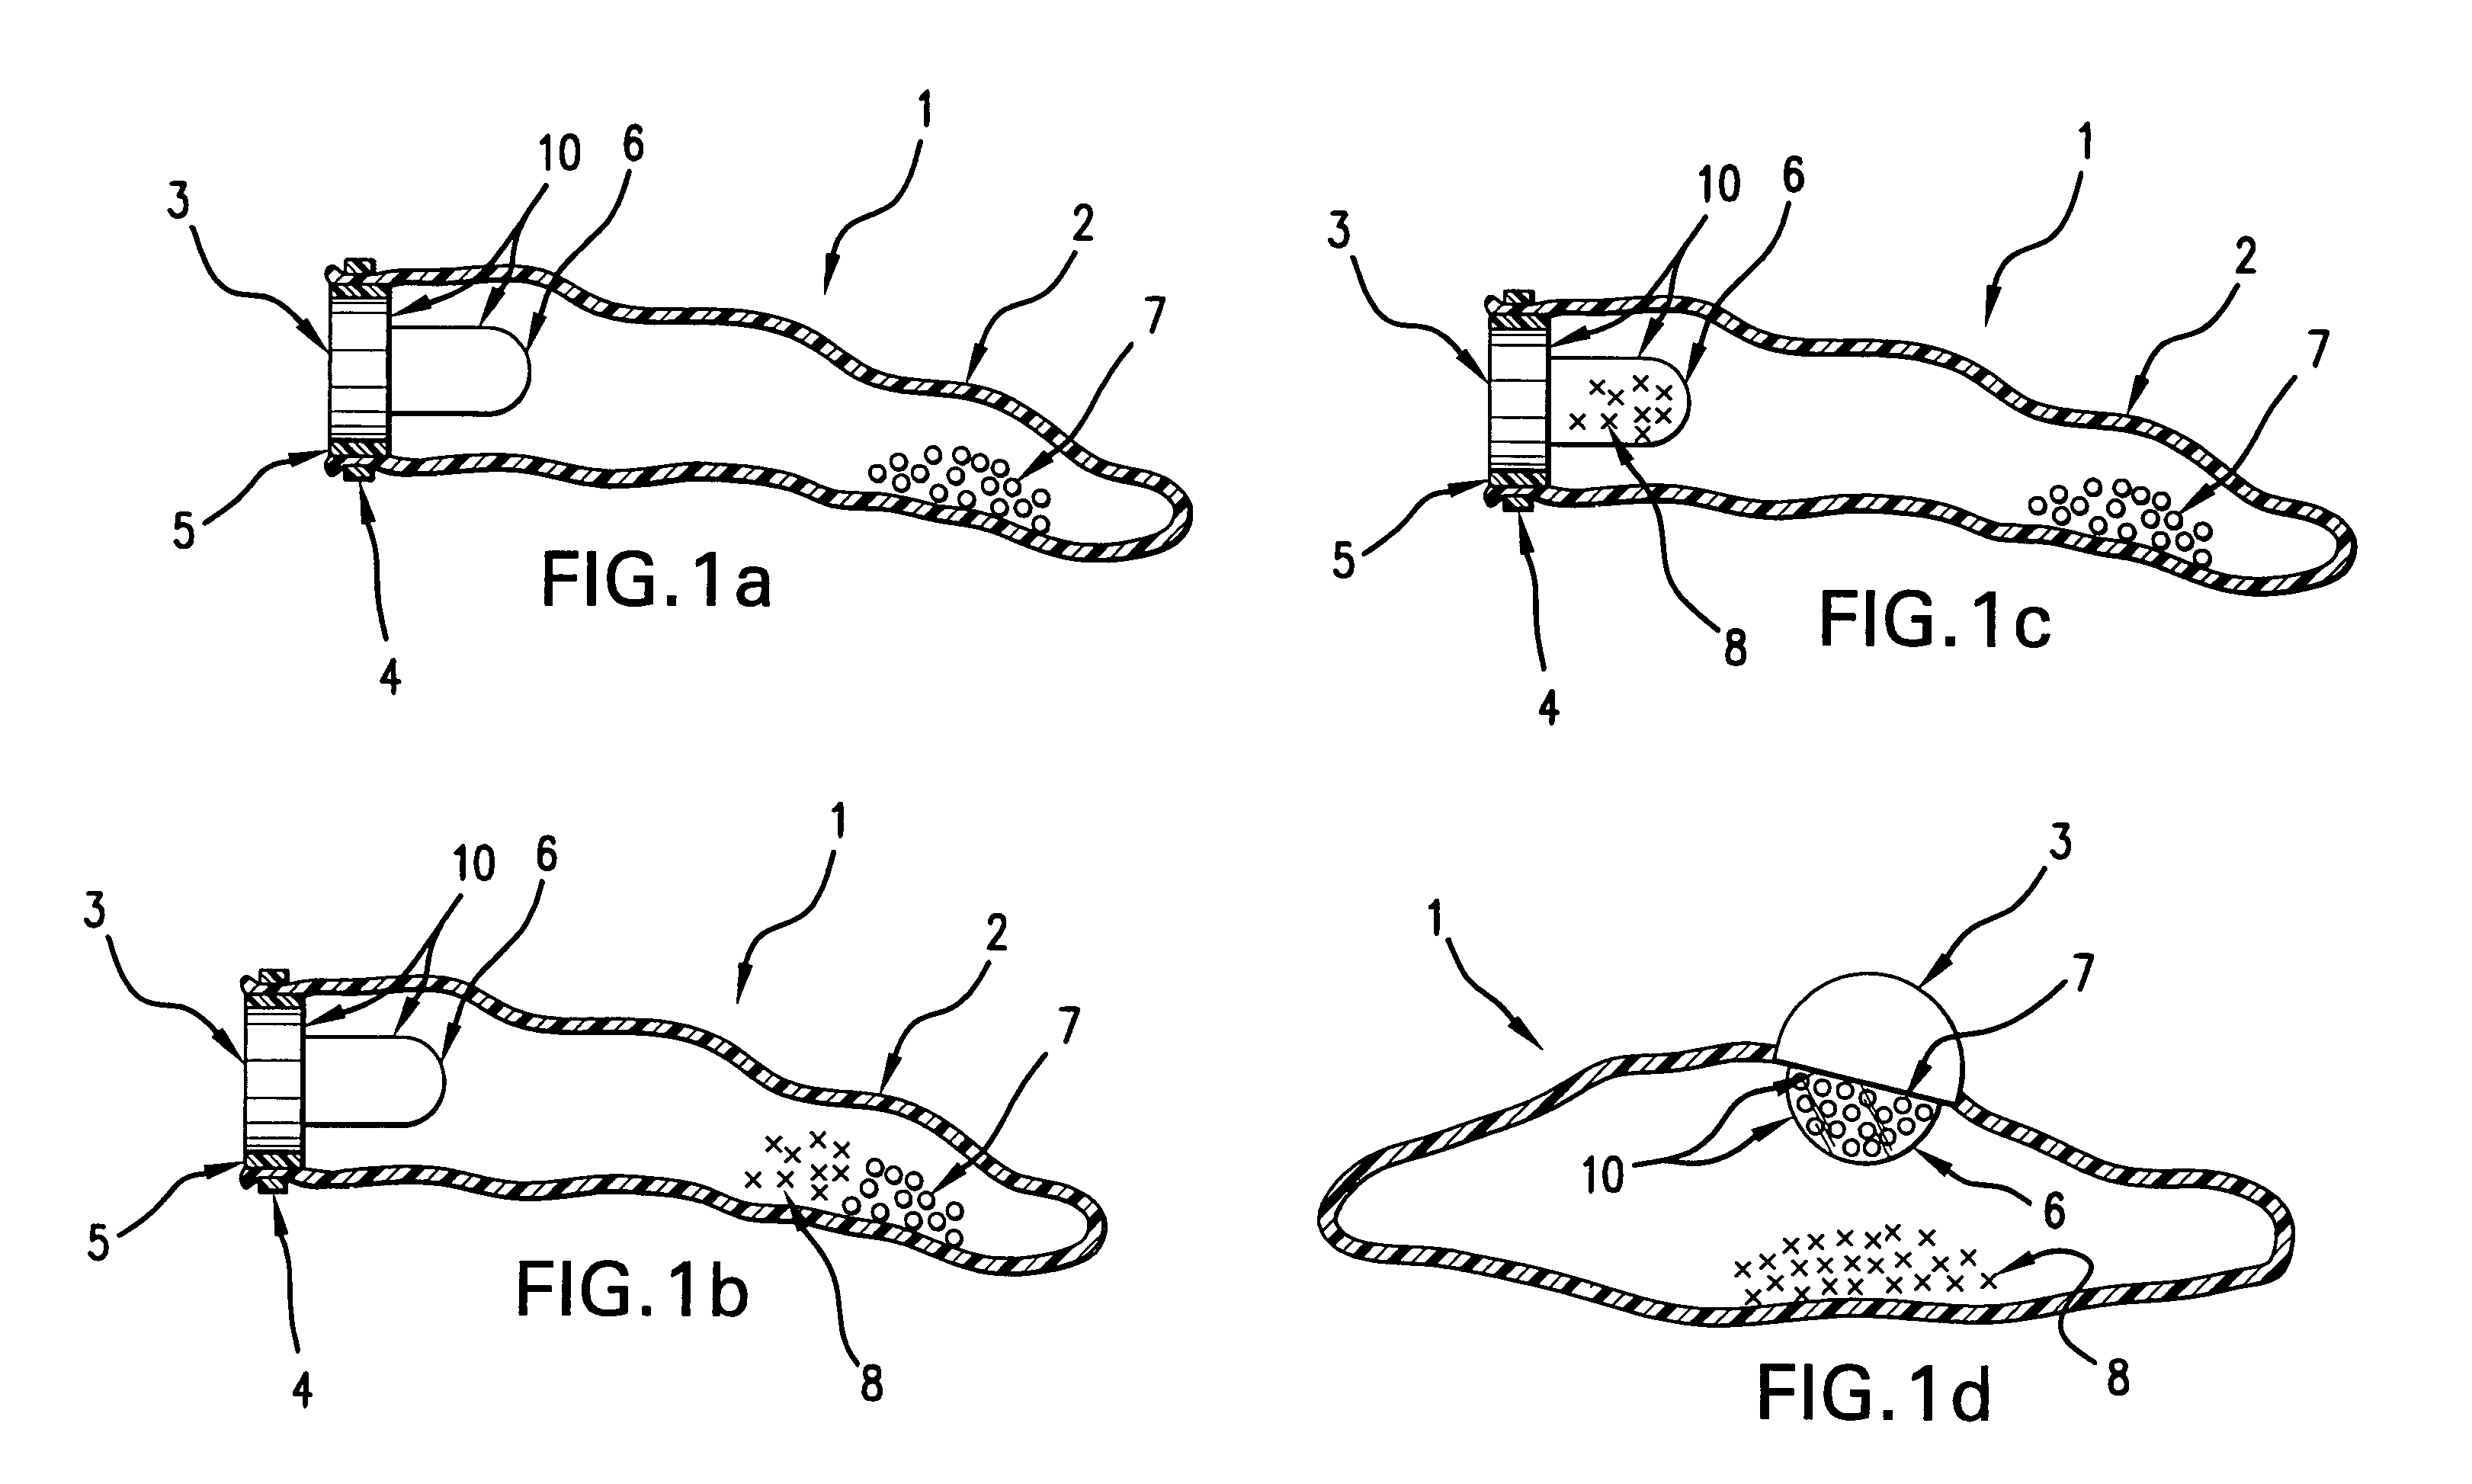 Self-inflating intragastric volume-occupying device